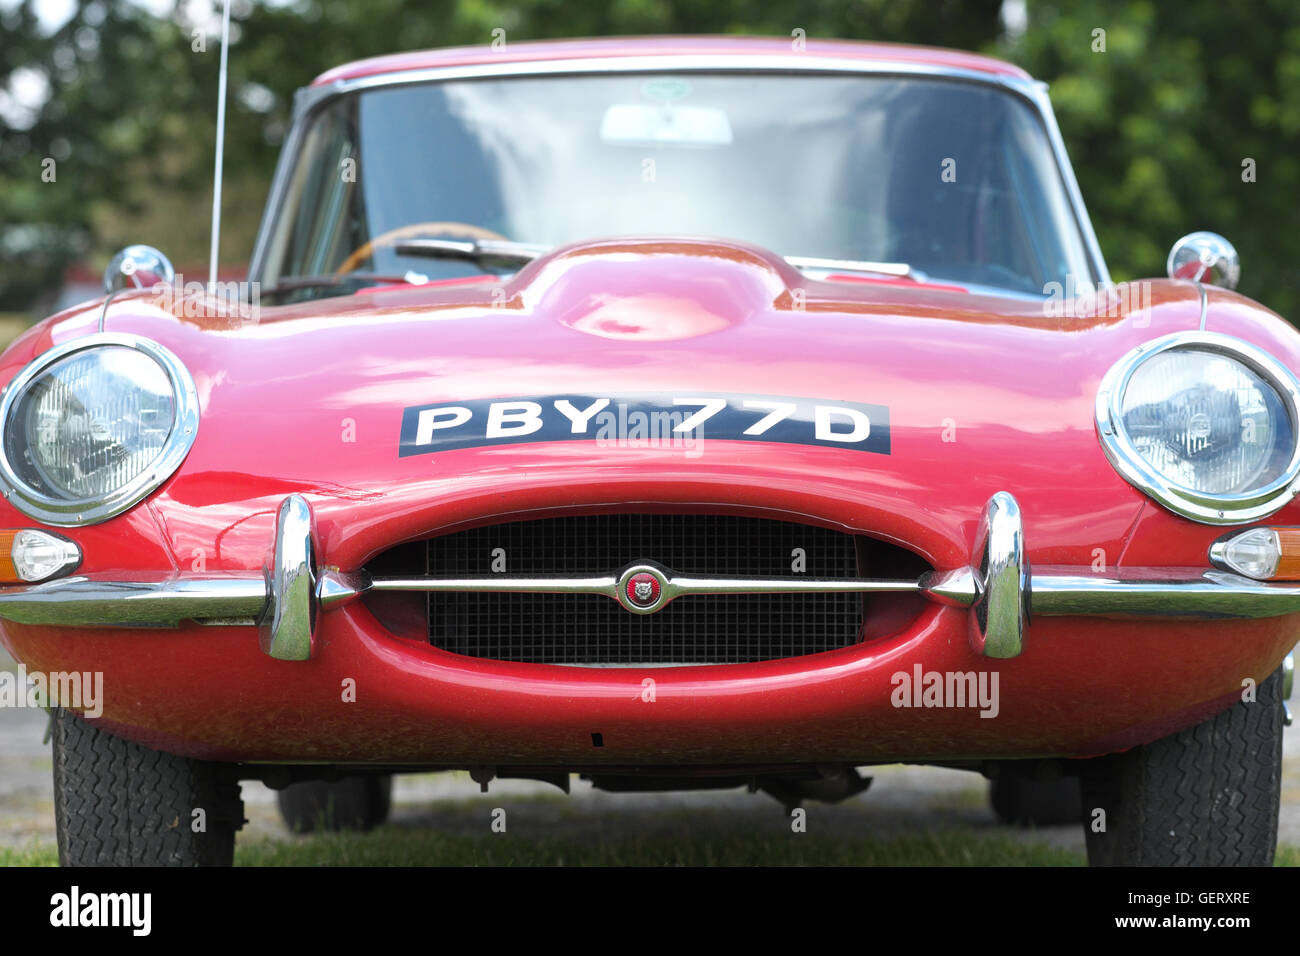 Red Jaguar E Type British sports car made in the mid Sixties 1960s Stock Photo